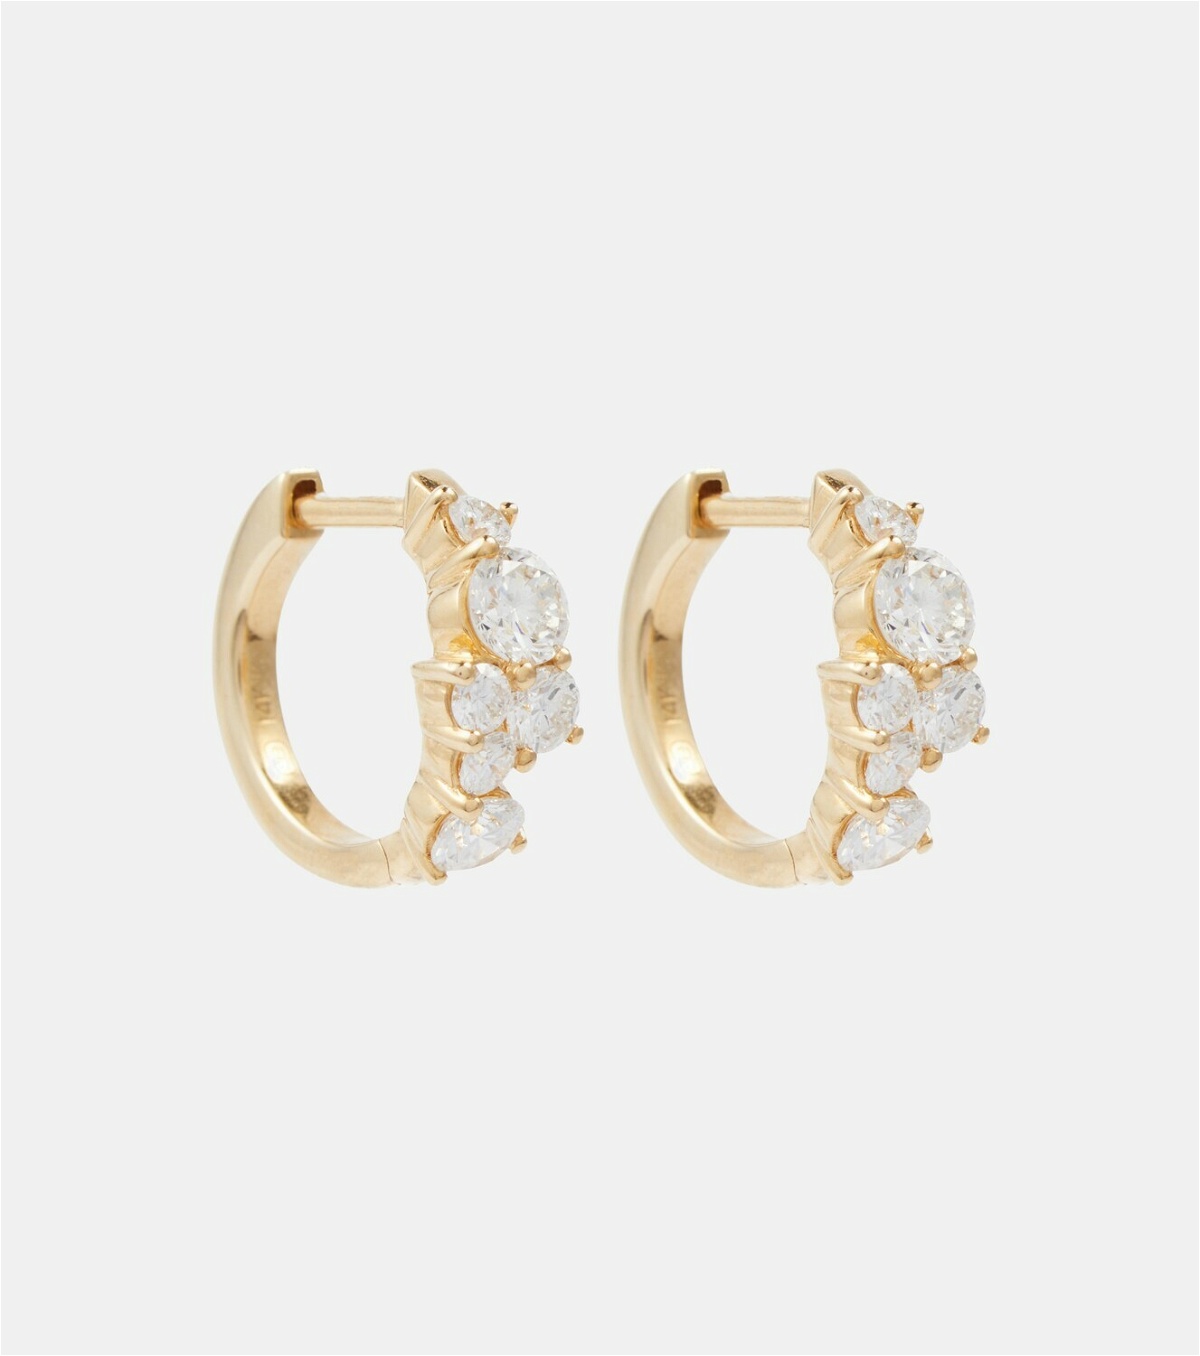 Sydney Evan Cocktail 14kt yellow gold and diamond hoop earrings